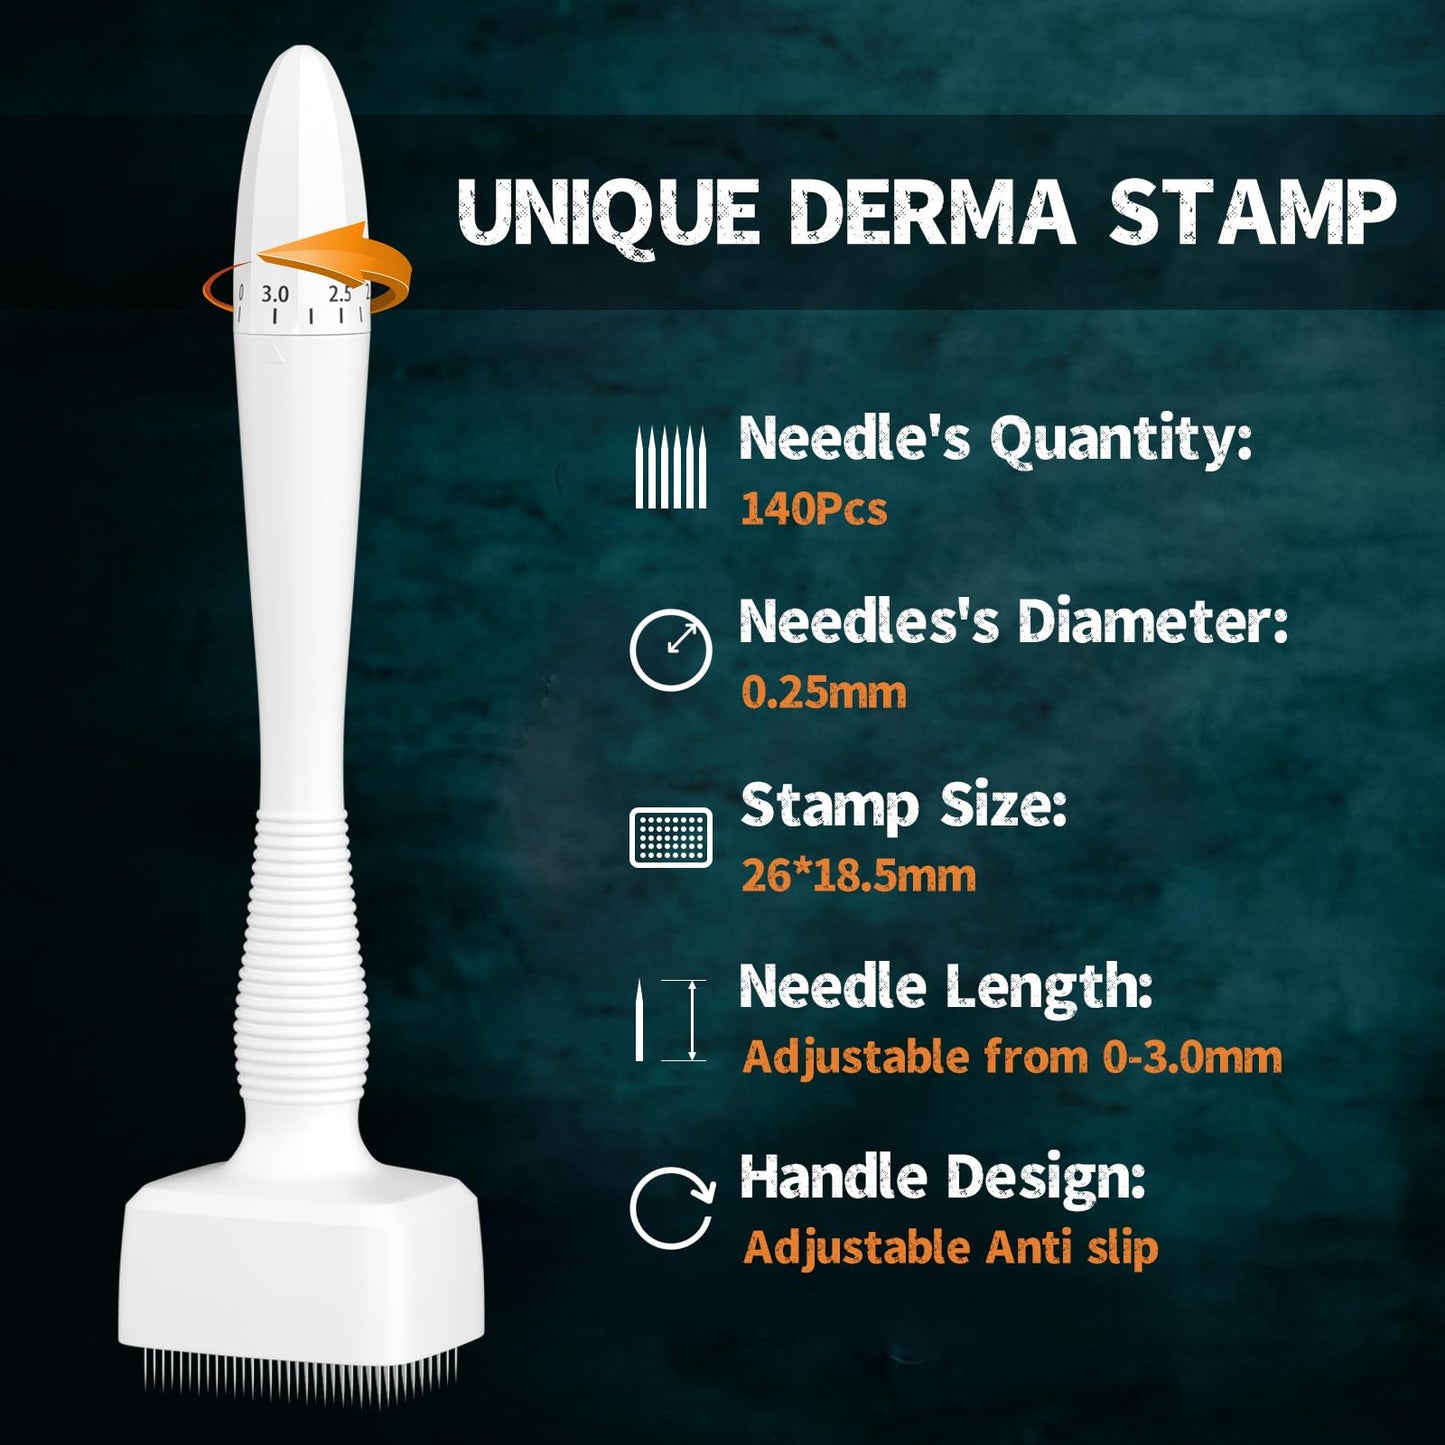 Agodafoo Derma Stamp for Women and Men Home Use, Derma Roller with 140A Needles, Adjust Microneedling Pen Beauty Pen for Face Body, Skin Care Gift